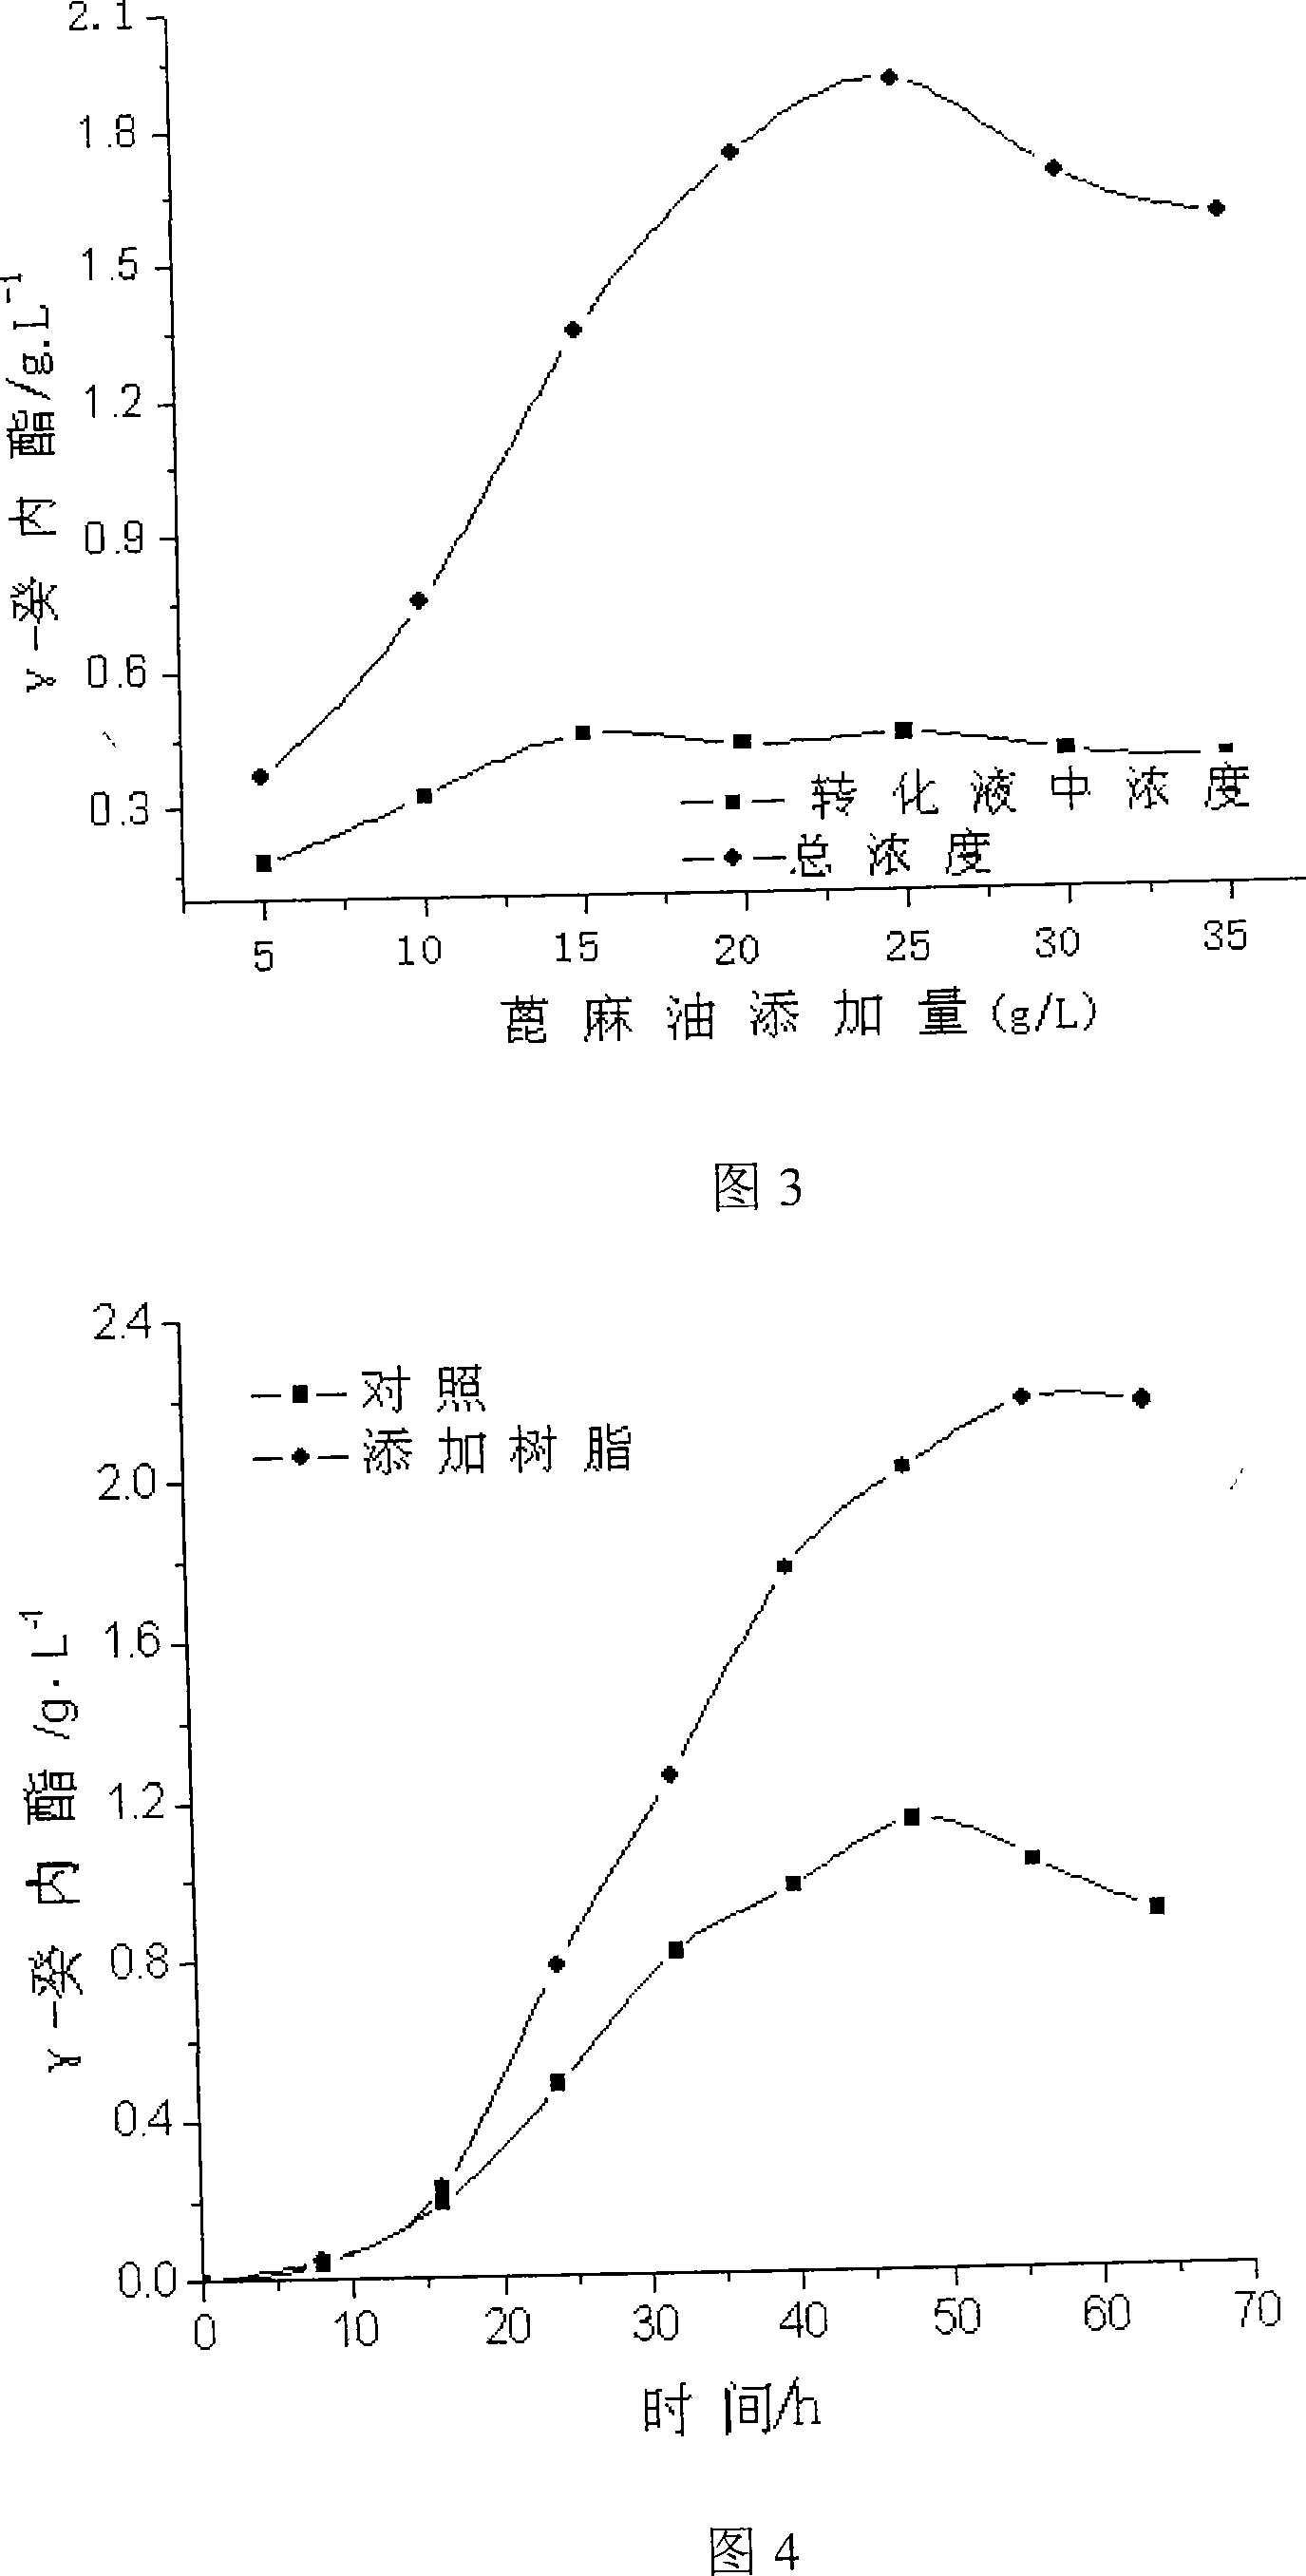 Method for preparing gamma-decalactone and improving output by biotransformation and separated coupling